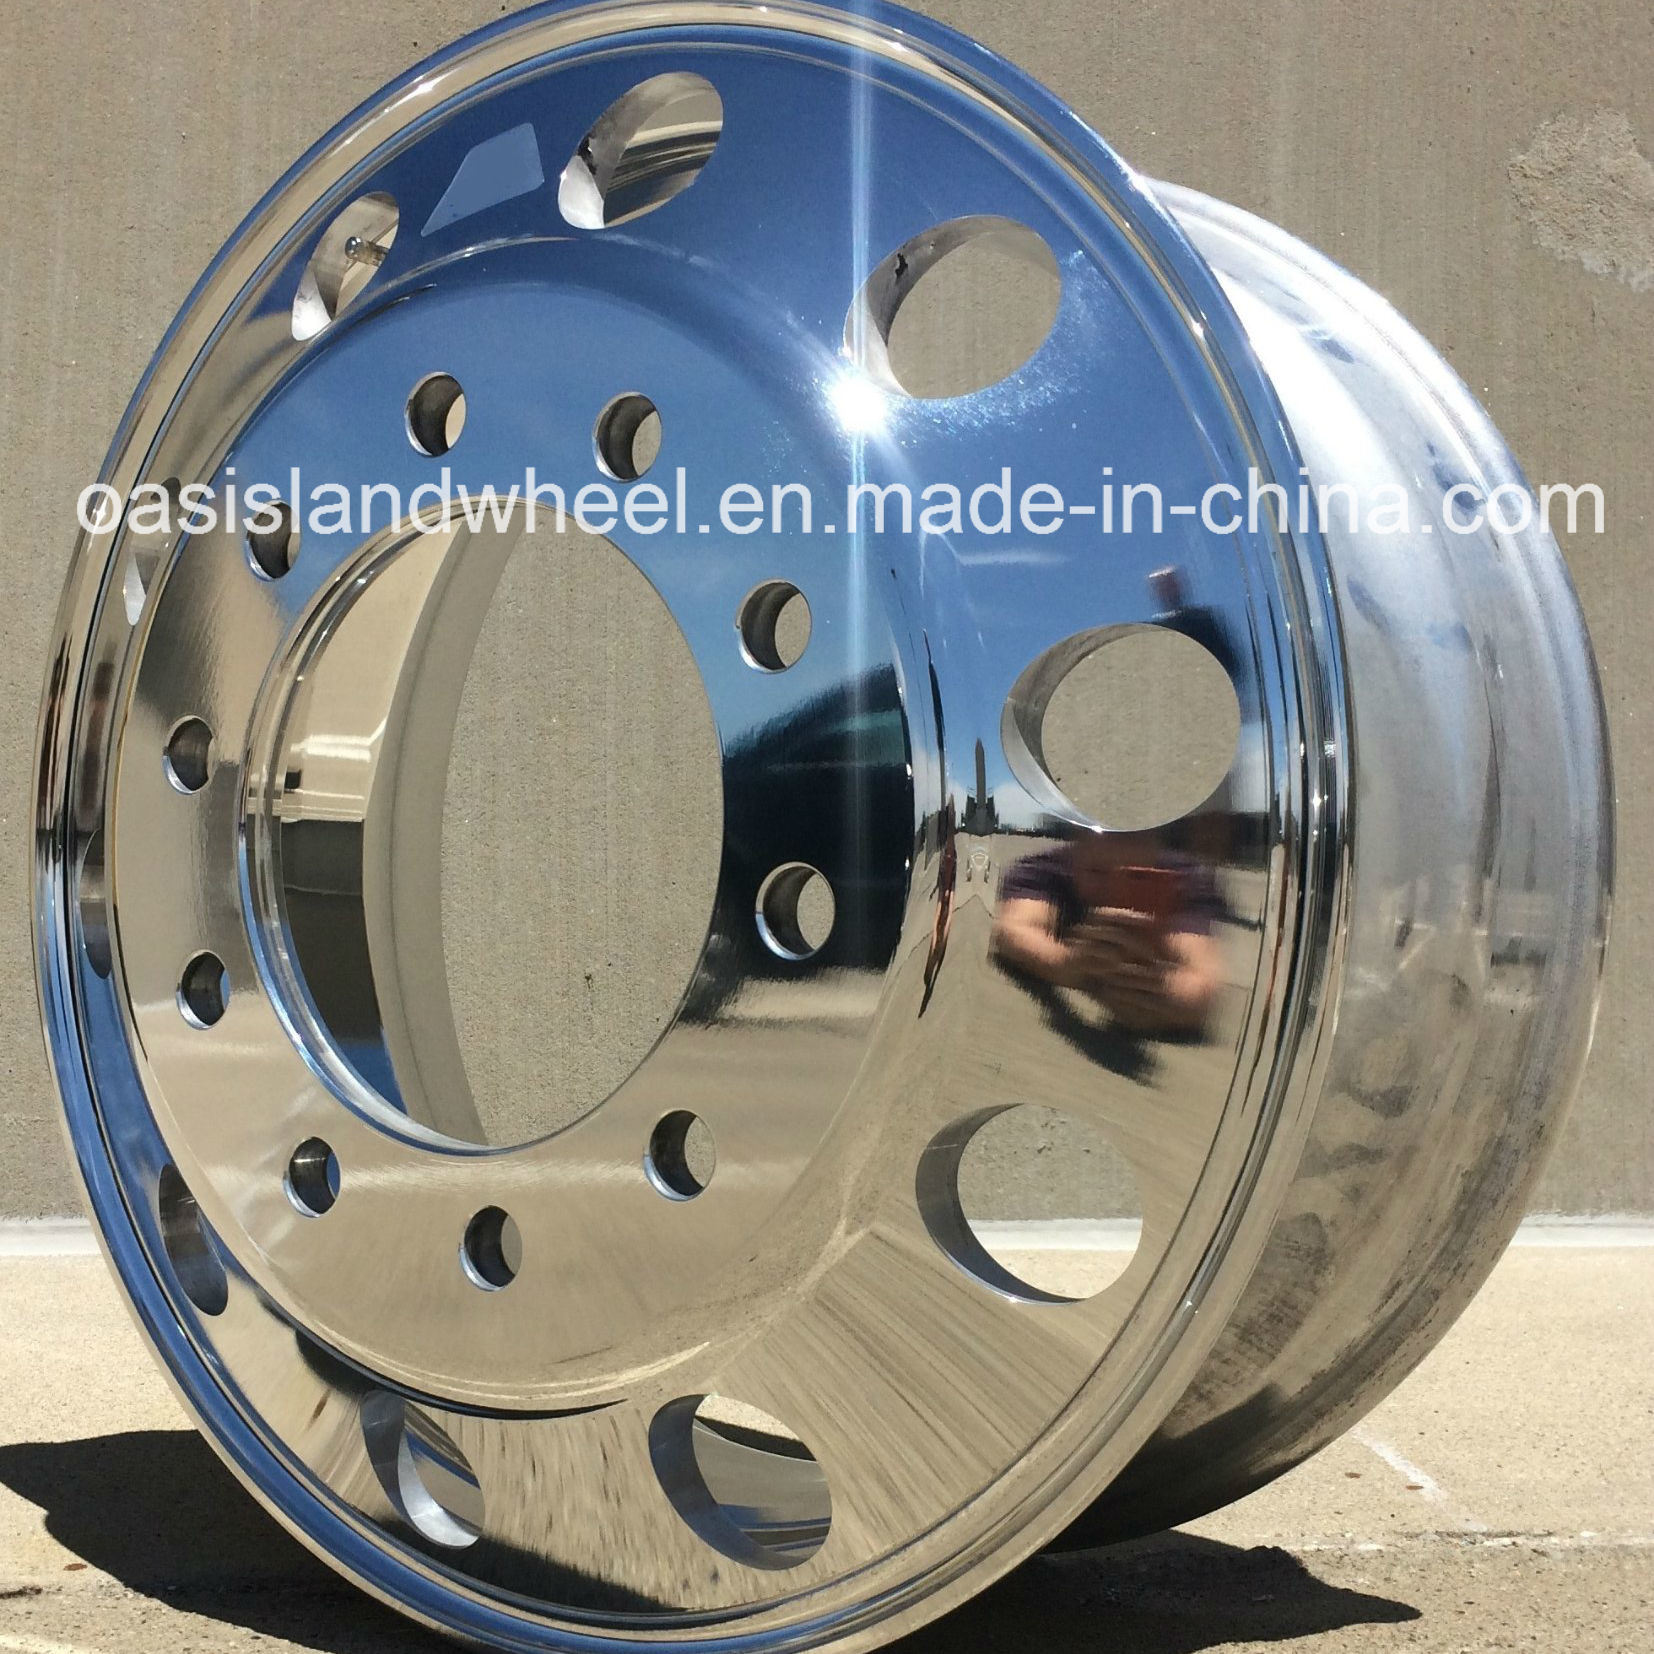 22.5 Aluminum Truck Wheel for 11r22.5 and 12r22.5